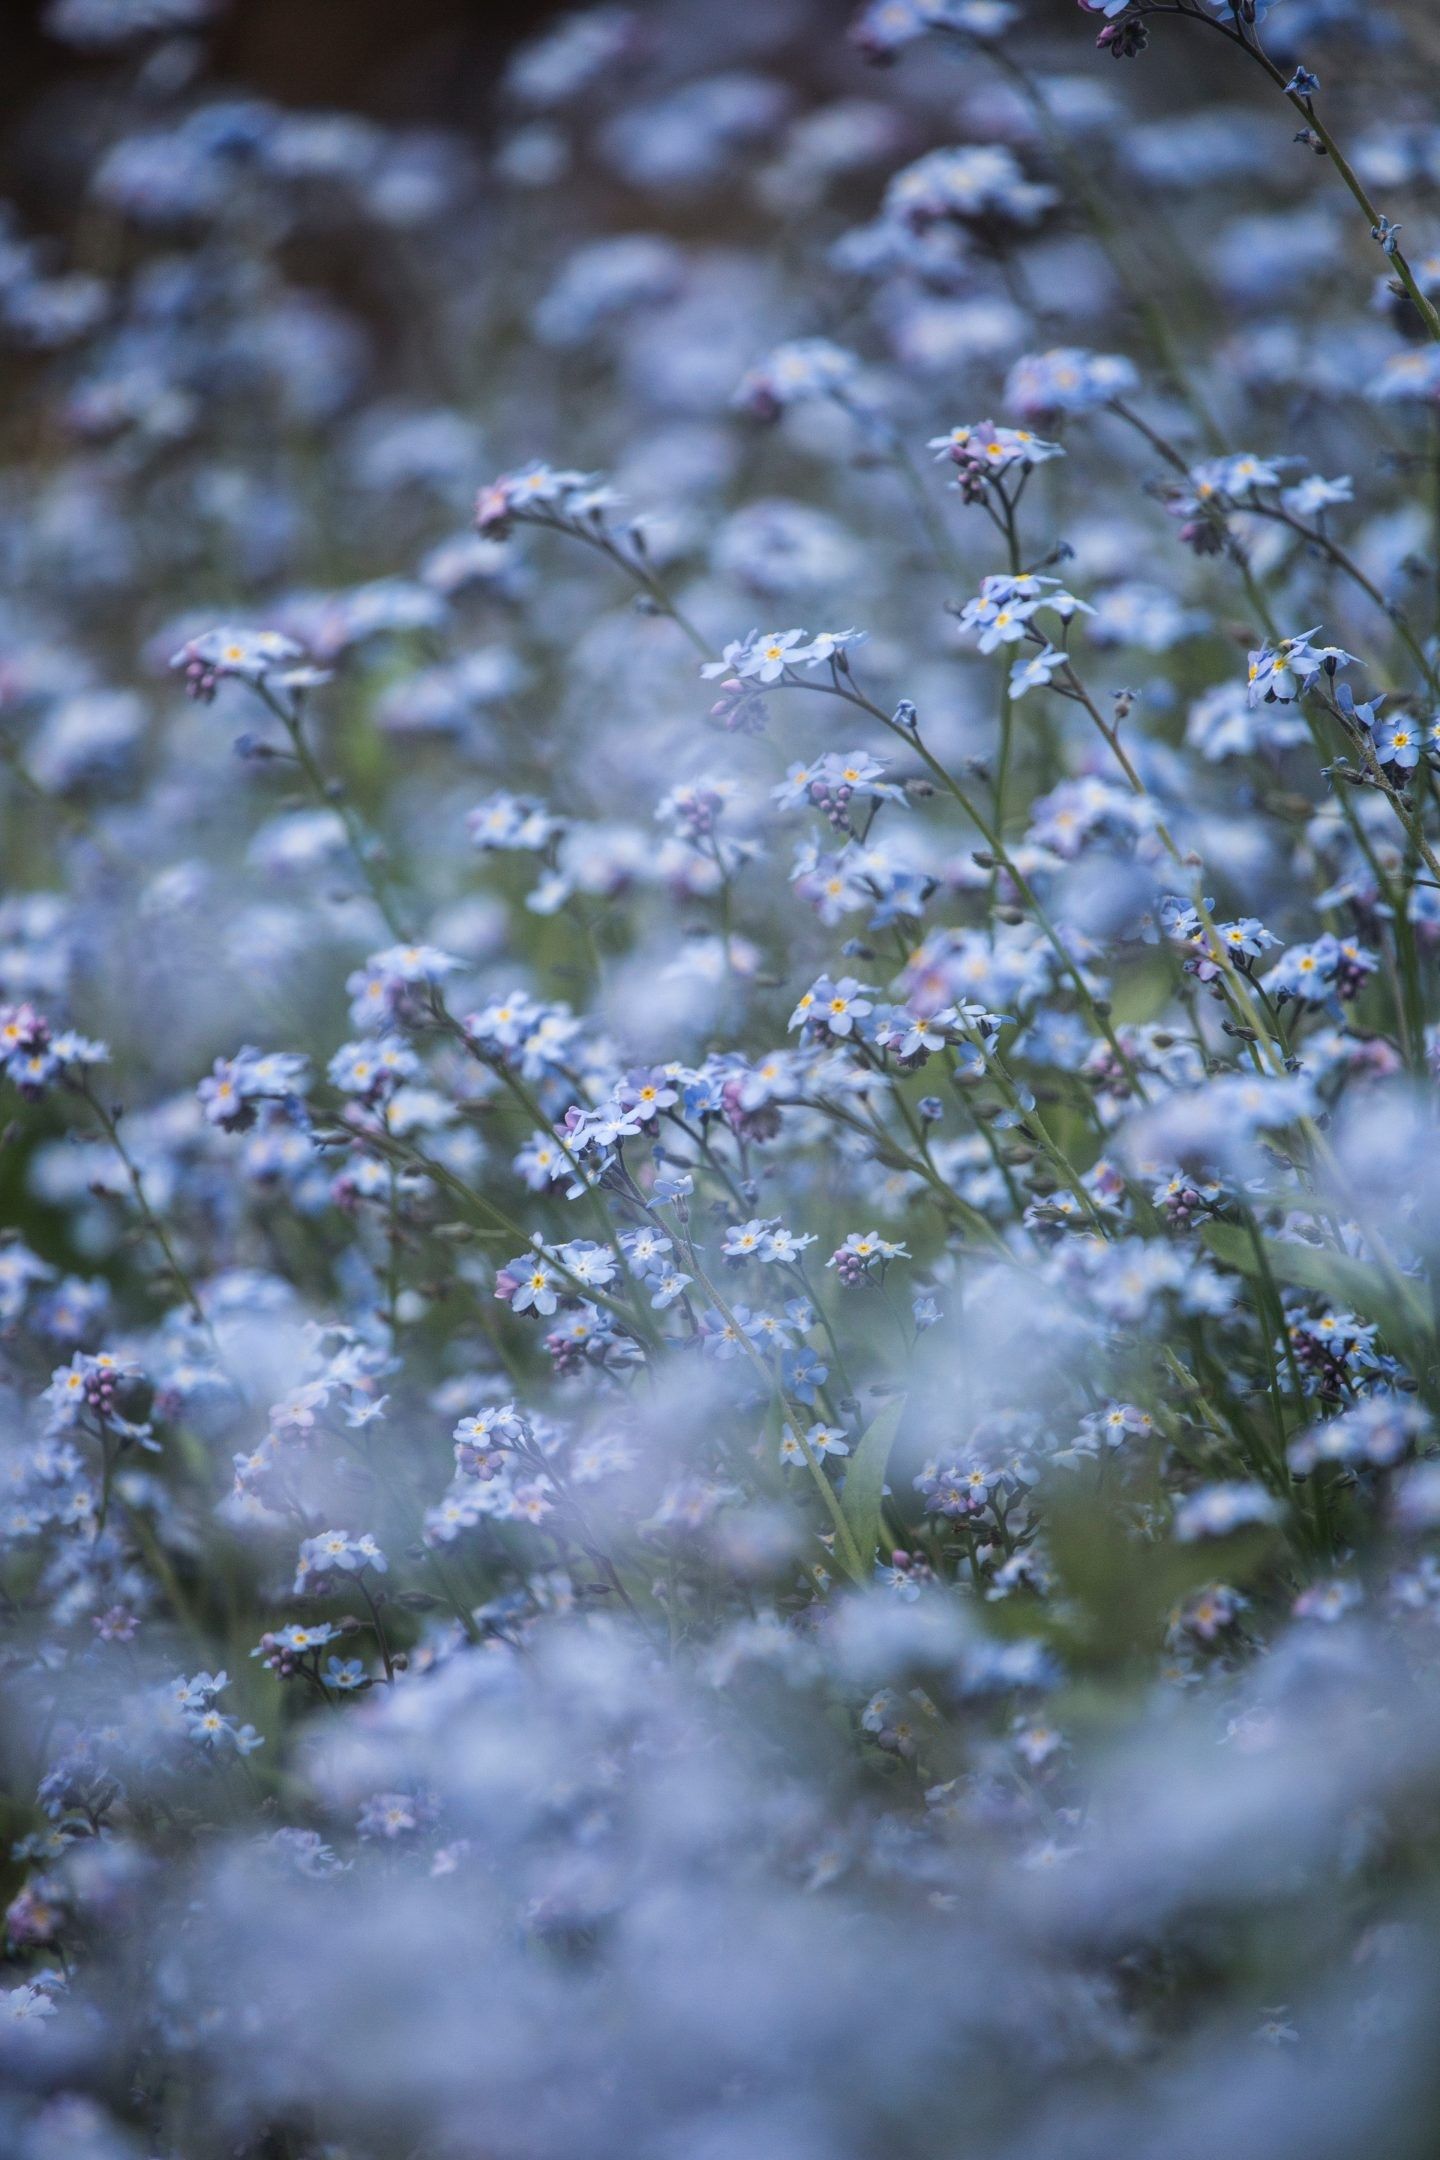 A field of blue flowers with a blurred background - Flower, clean